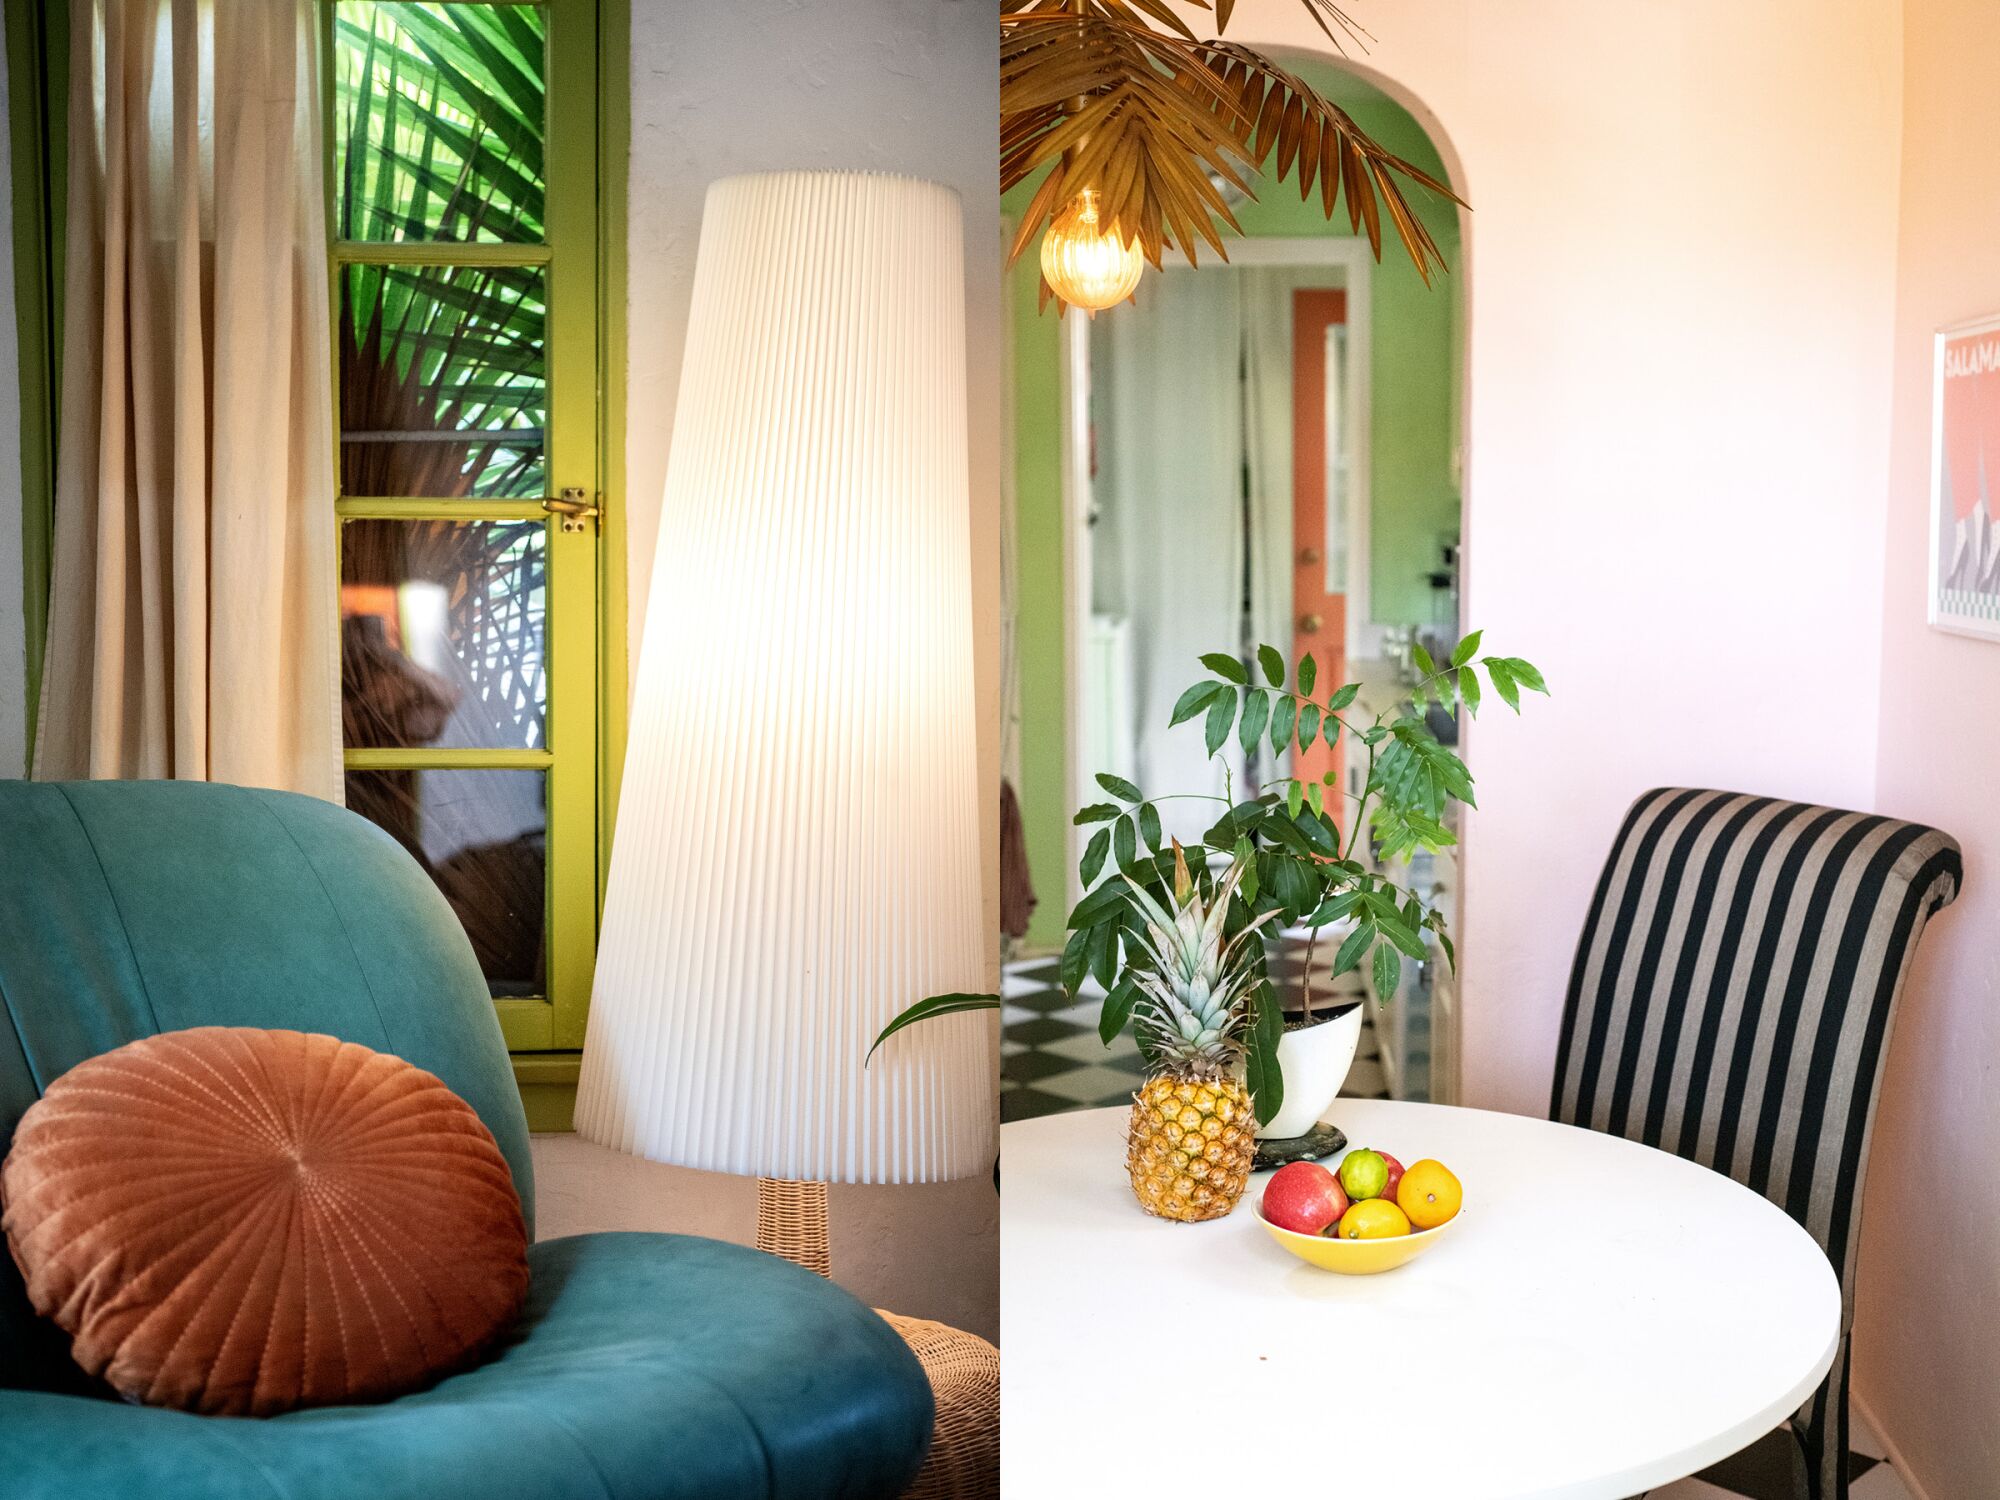 Two photos side by side of a chair in a living room, left, and the breakfast nook, right, colorfully decorated.